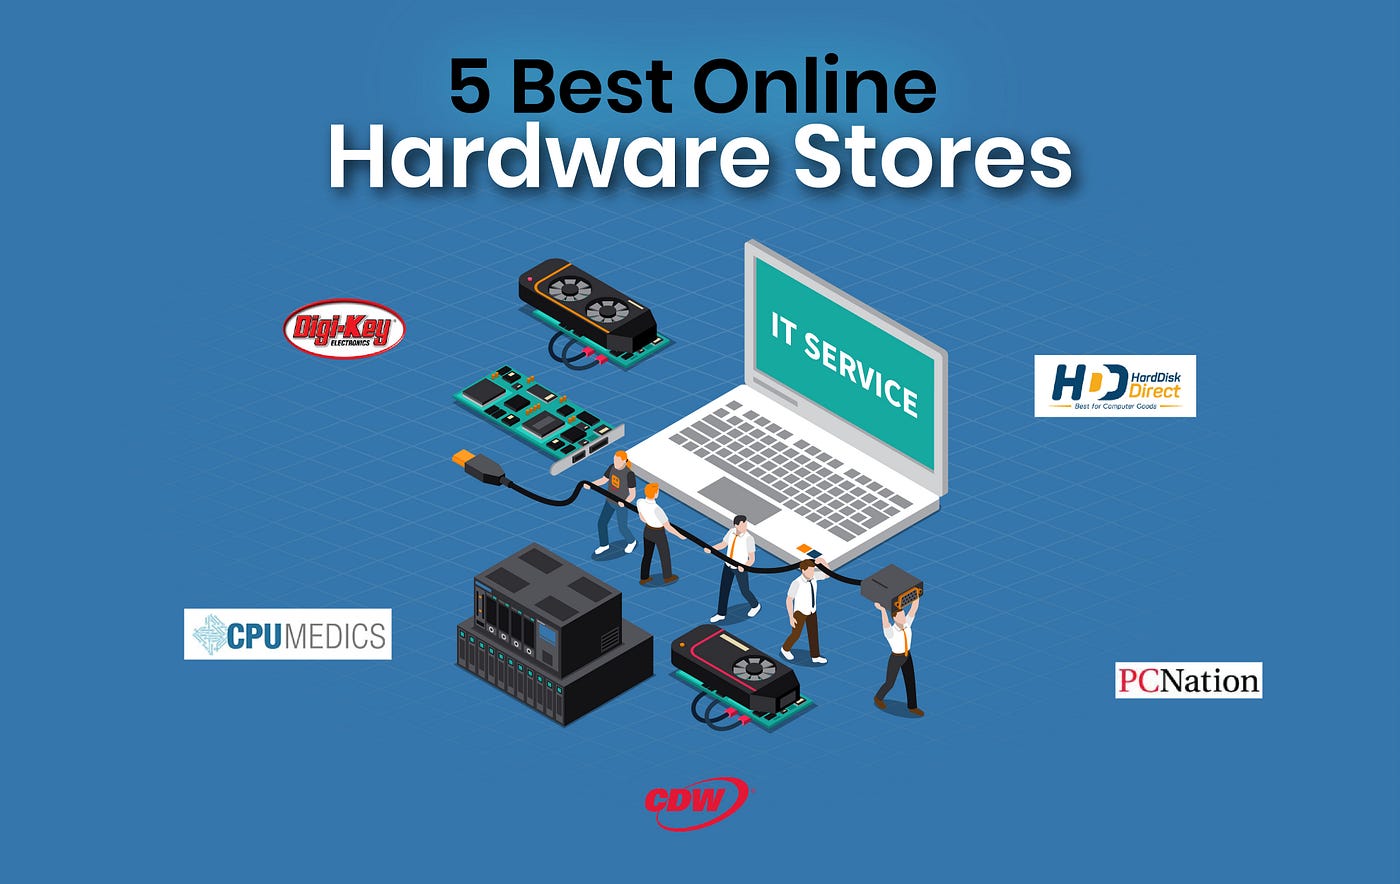 Computer Market: 5 Shops For All Your PC Needs